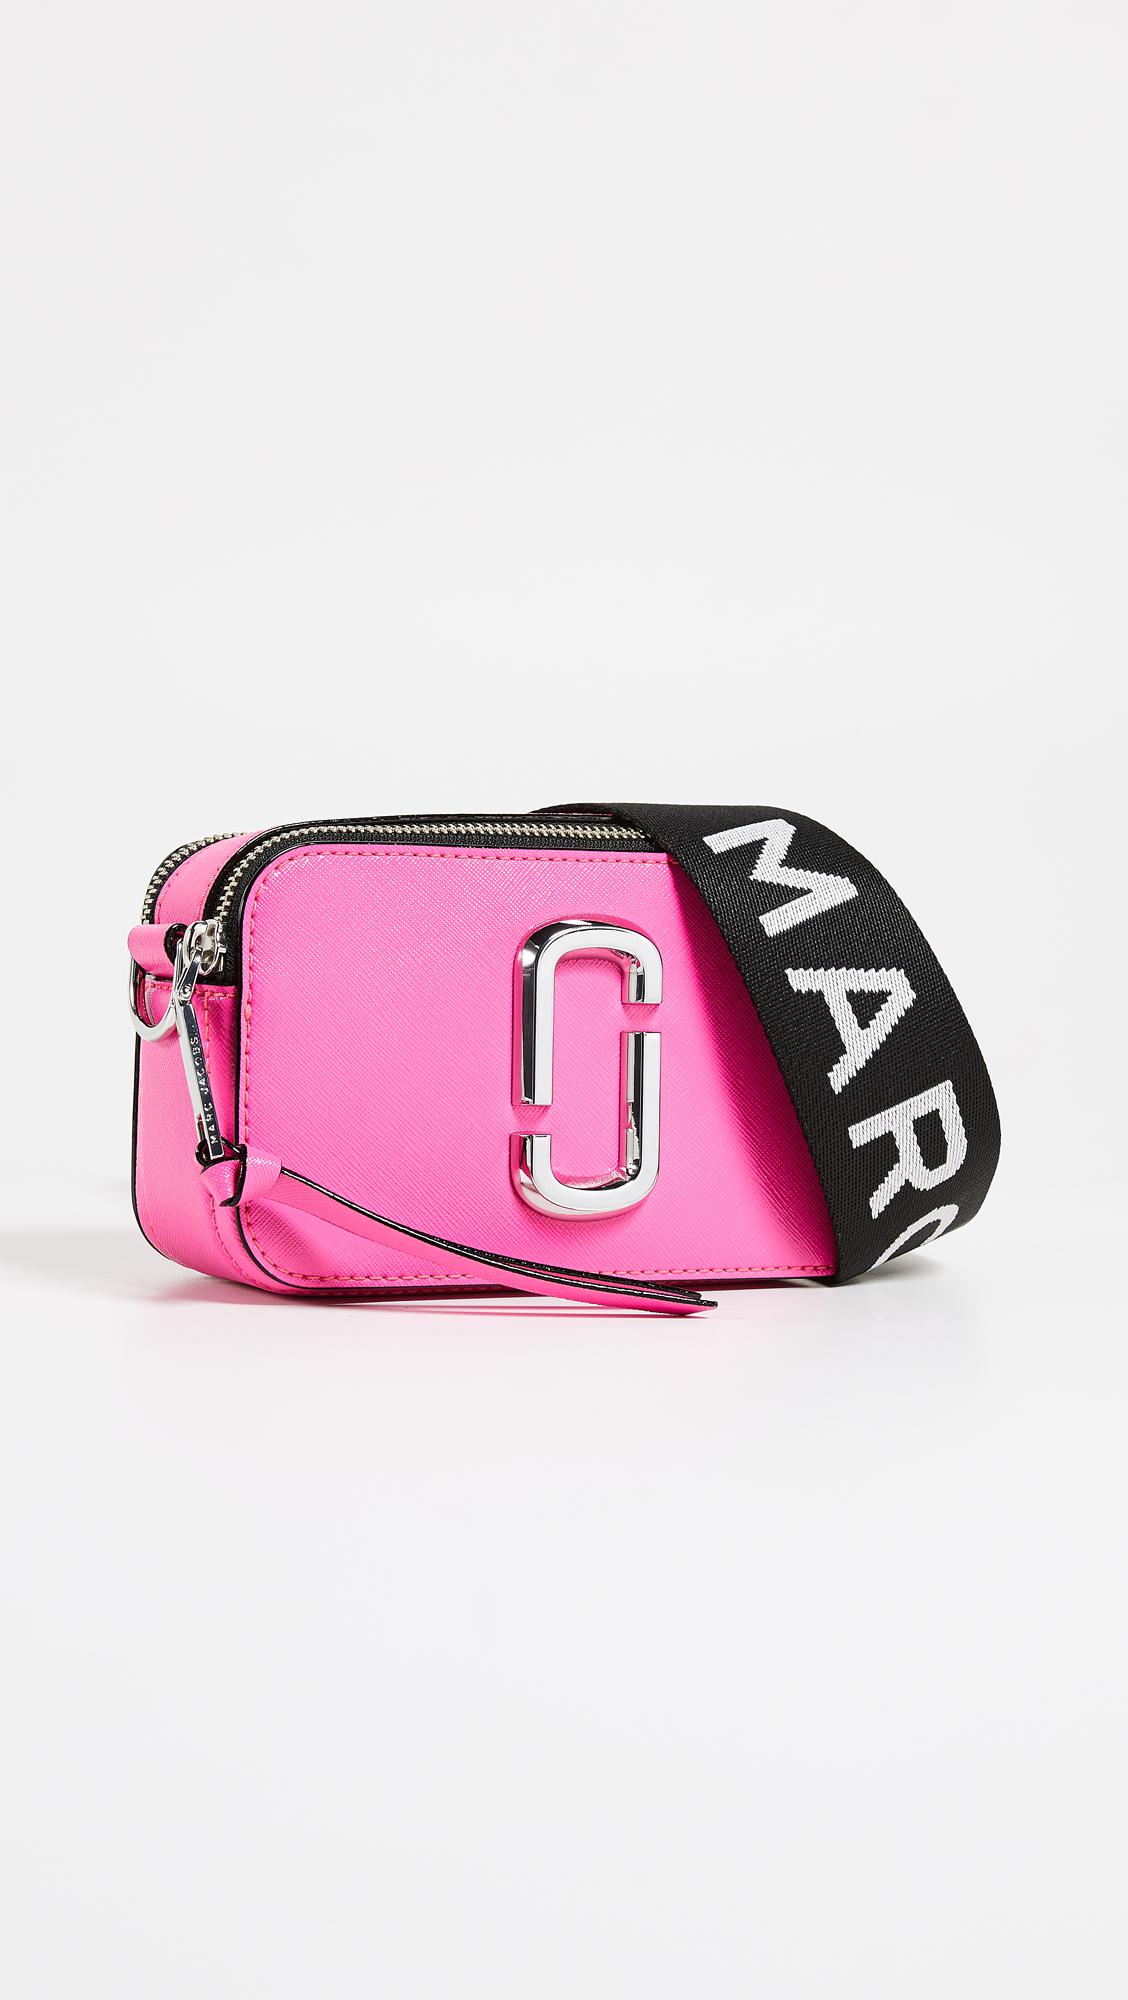 Marc Jacobs Snapshot Fluoro Bag In Bright Pink Leather With Polyurethane  Coating | Lyst